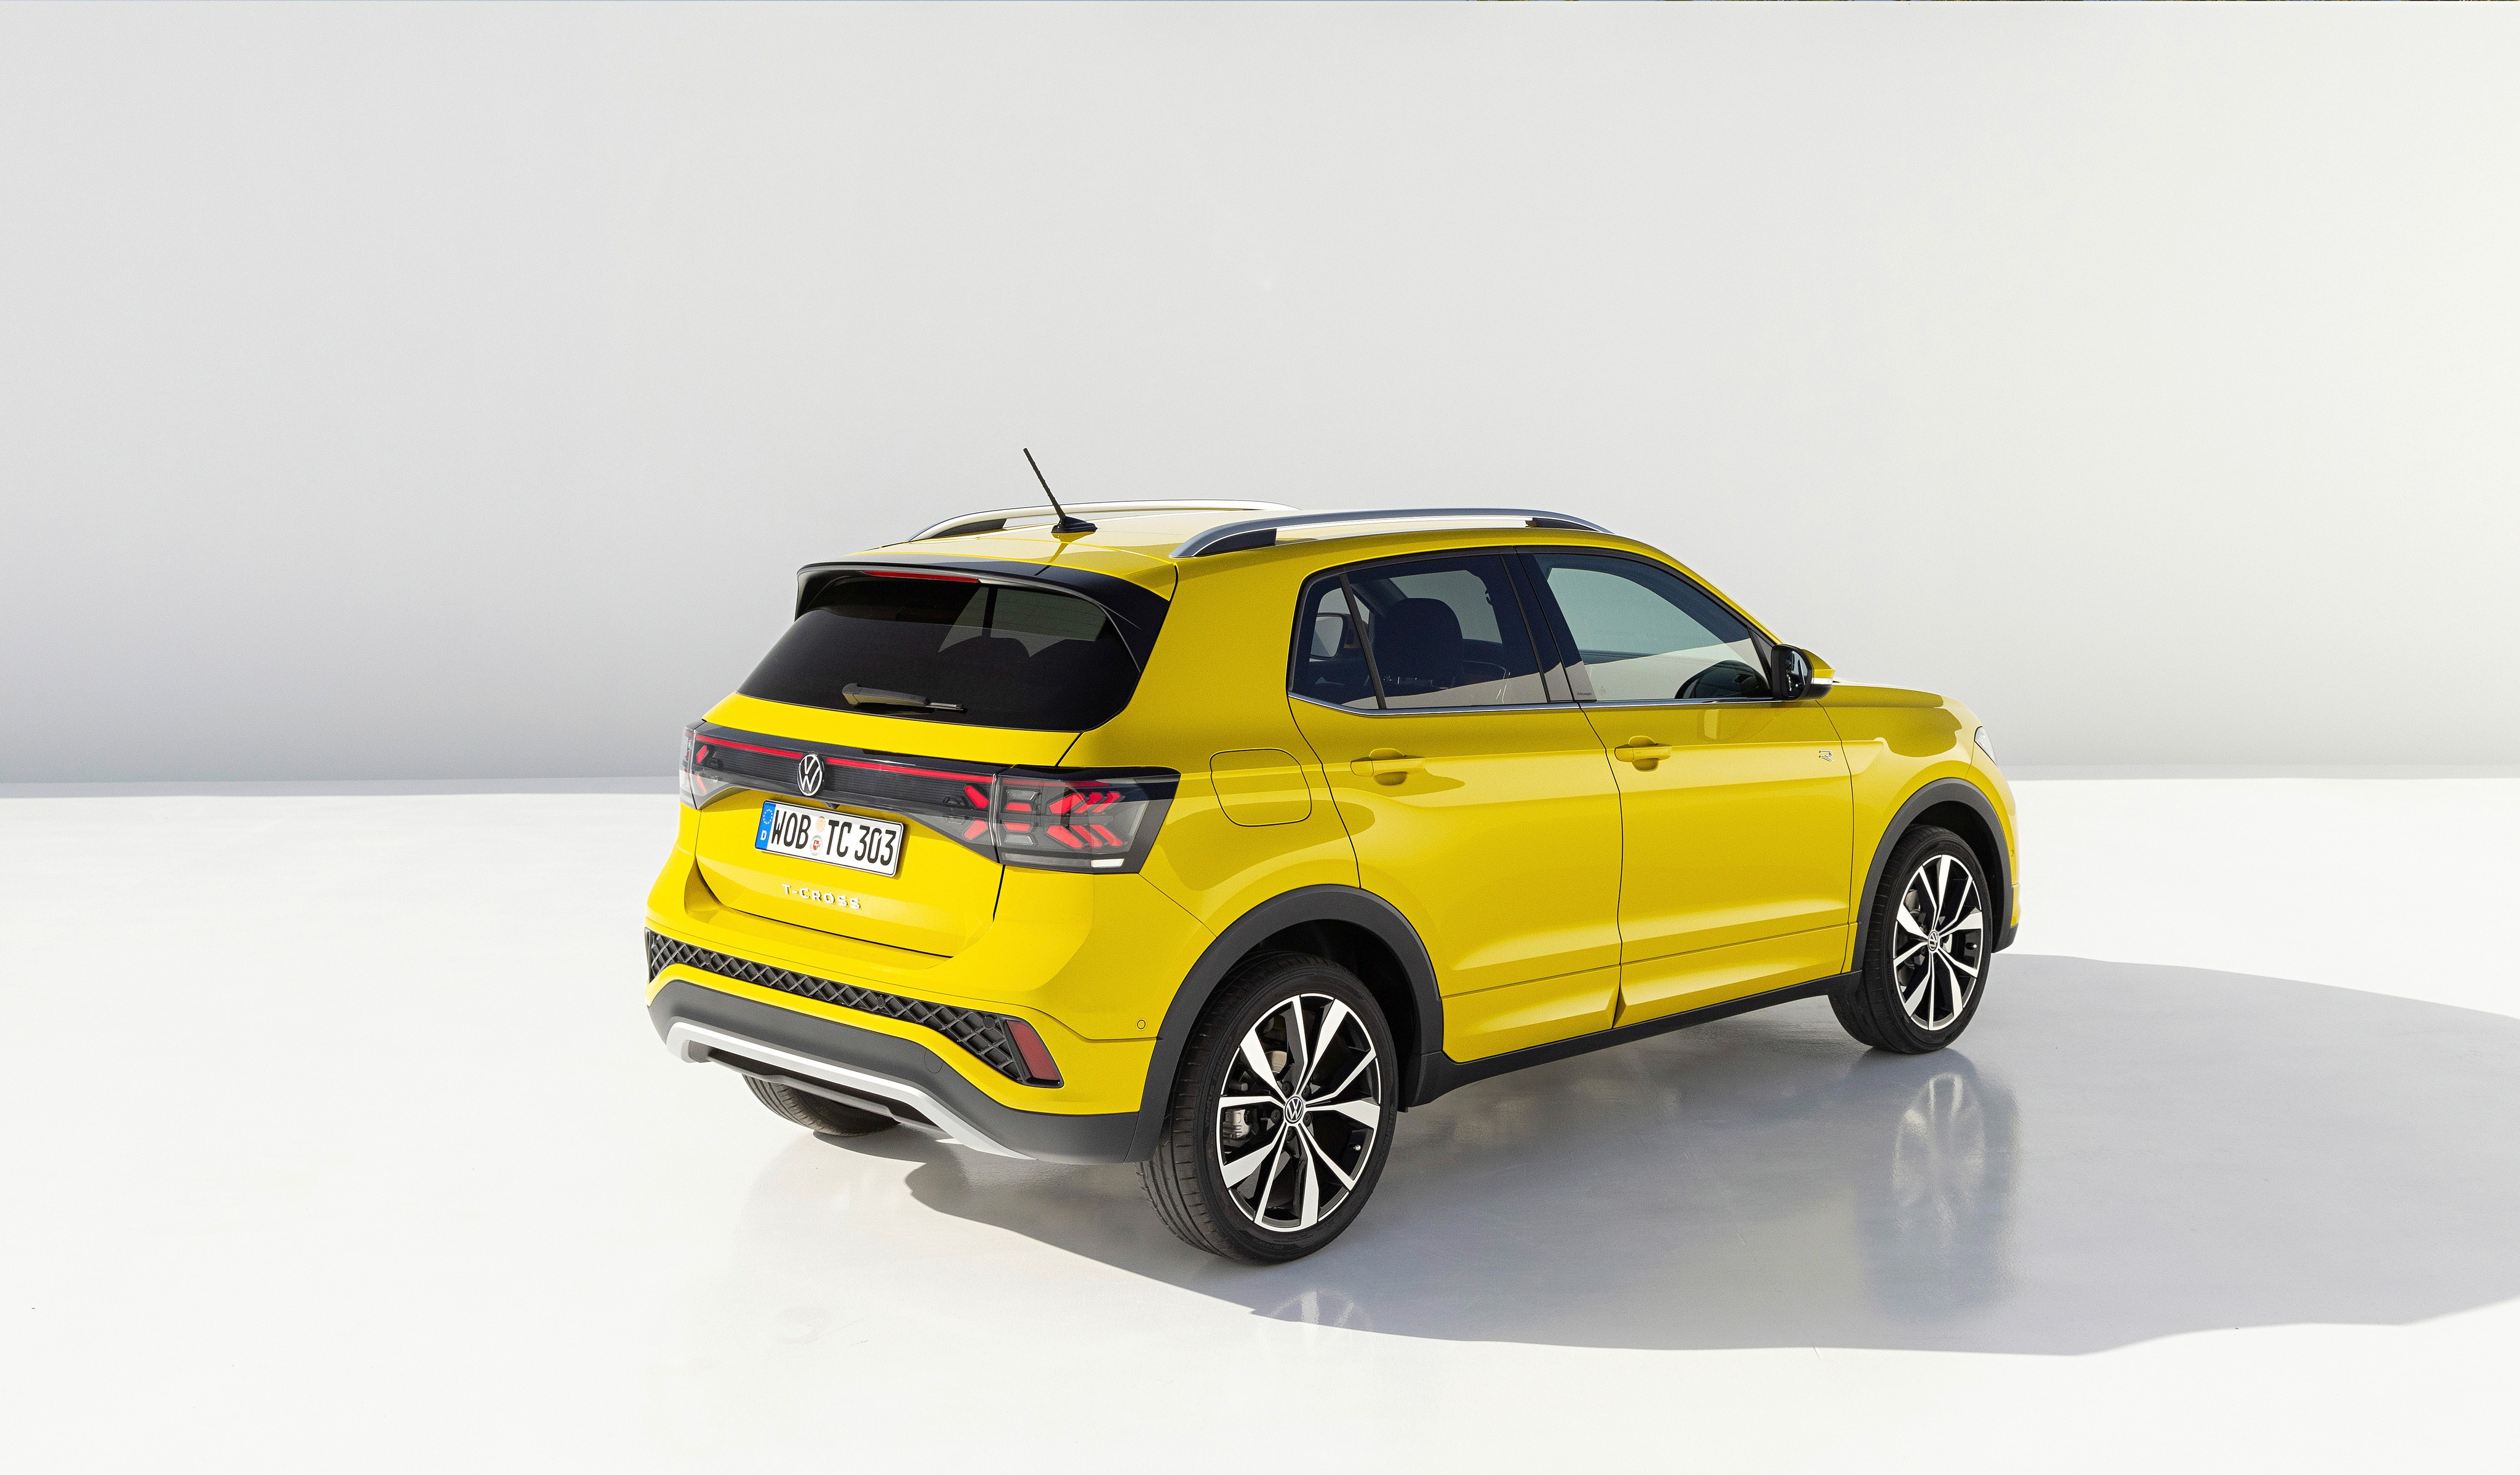 Introducing the Rubber Ducky Yellow T-Cross